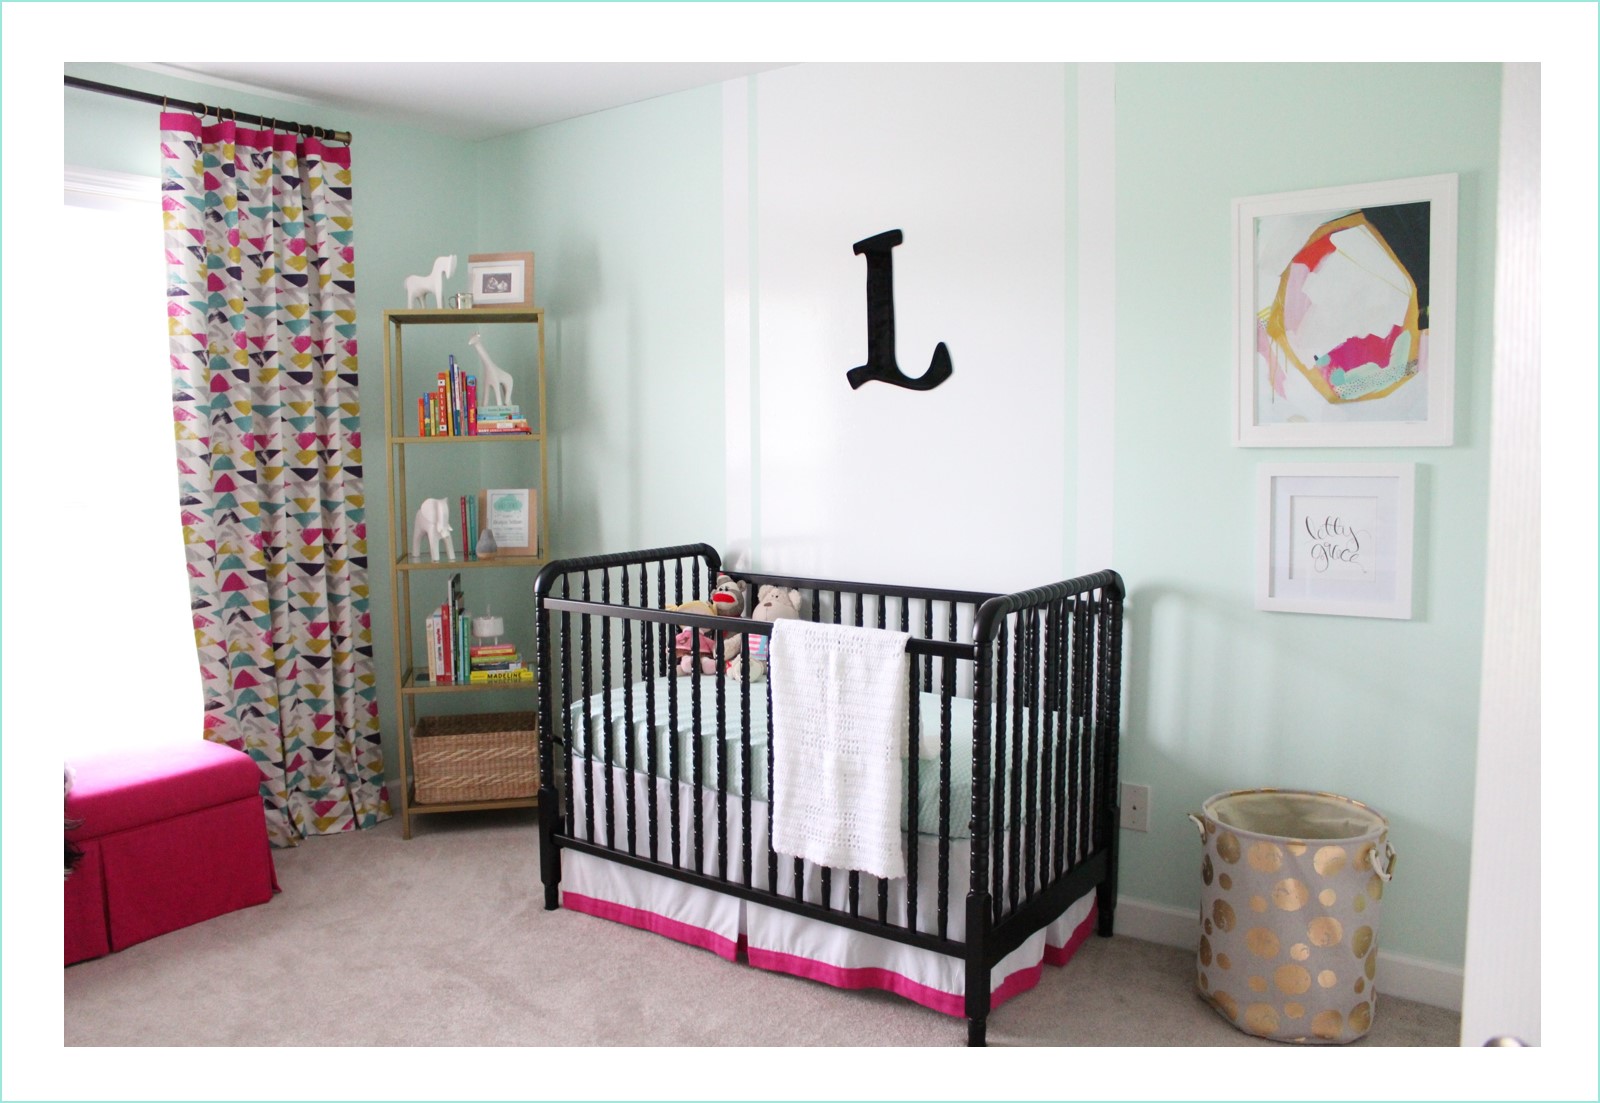 Black Jenny Lind Crib in this Eclectic Nursery